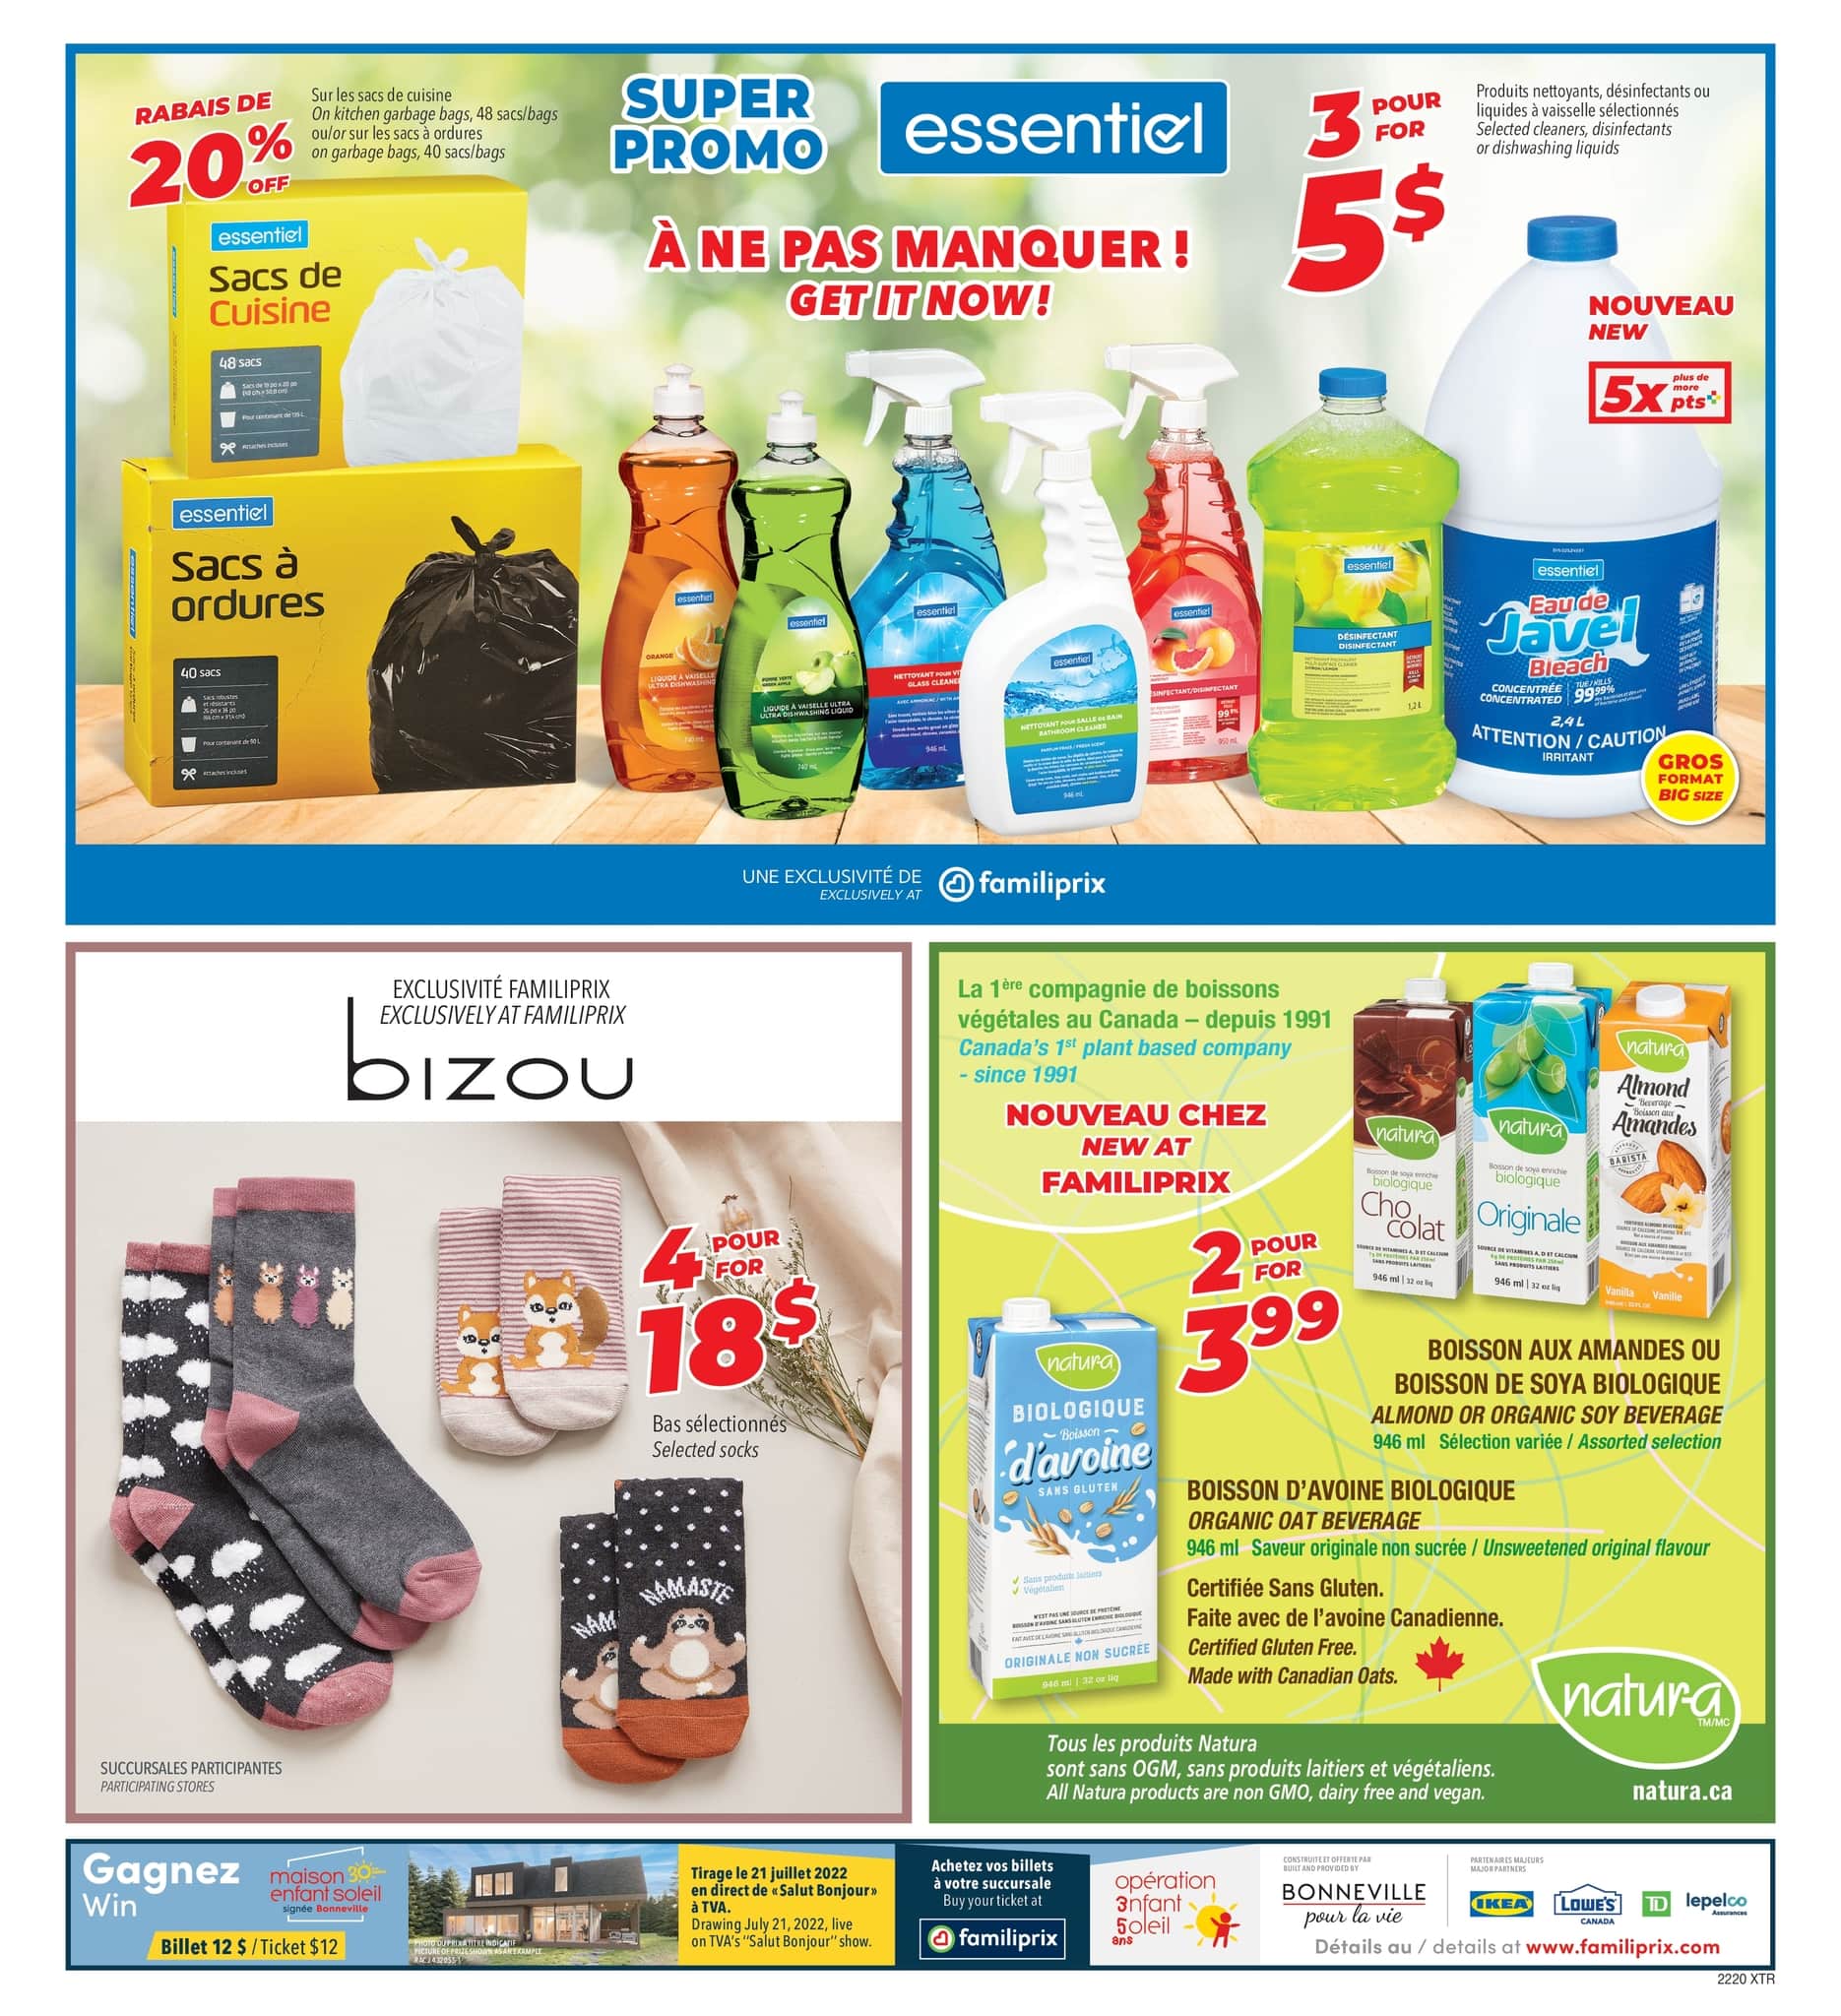 Familiprix - Weekly Flyer Specials - Page 10